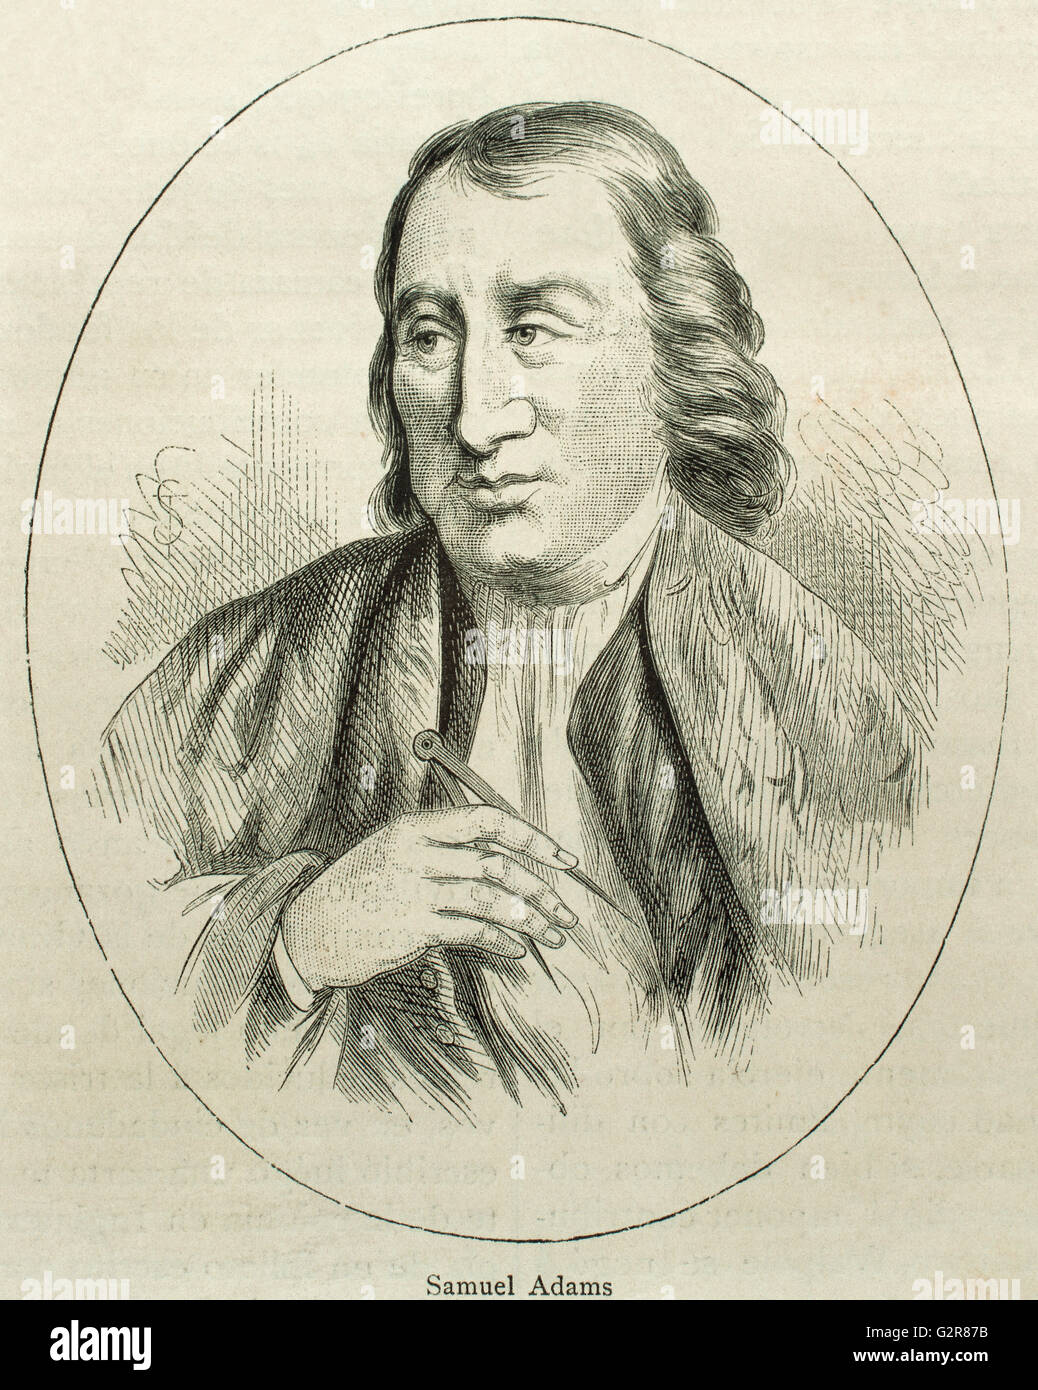 Samuel Adams (1722-1803). American statesman, political philosopher, and one of the Founding Fathers of the United States. Portrait. Engraving. Stock Photo